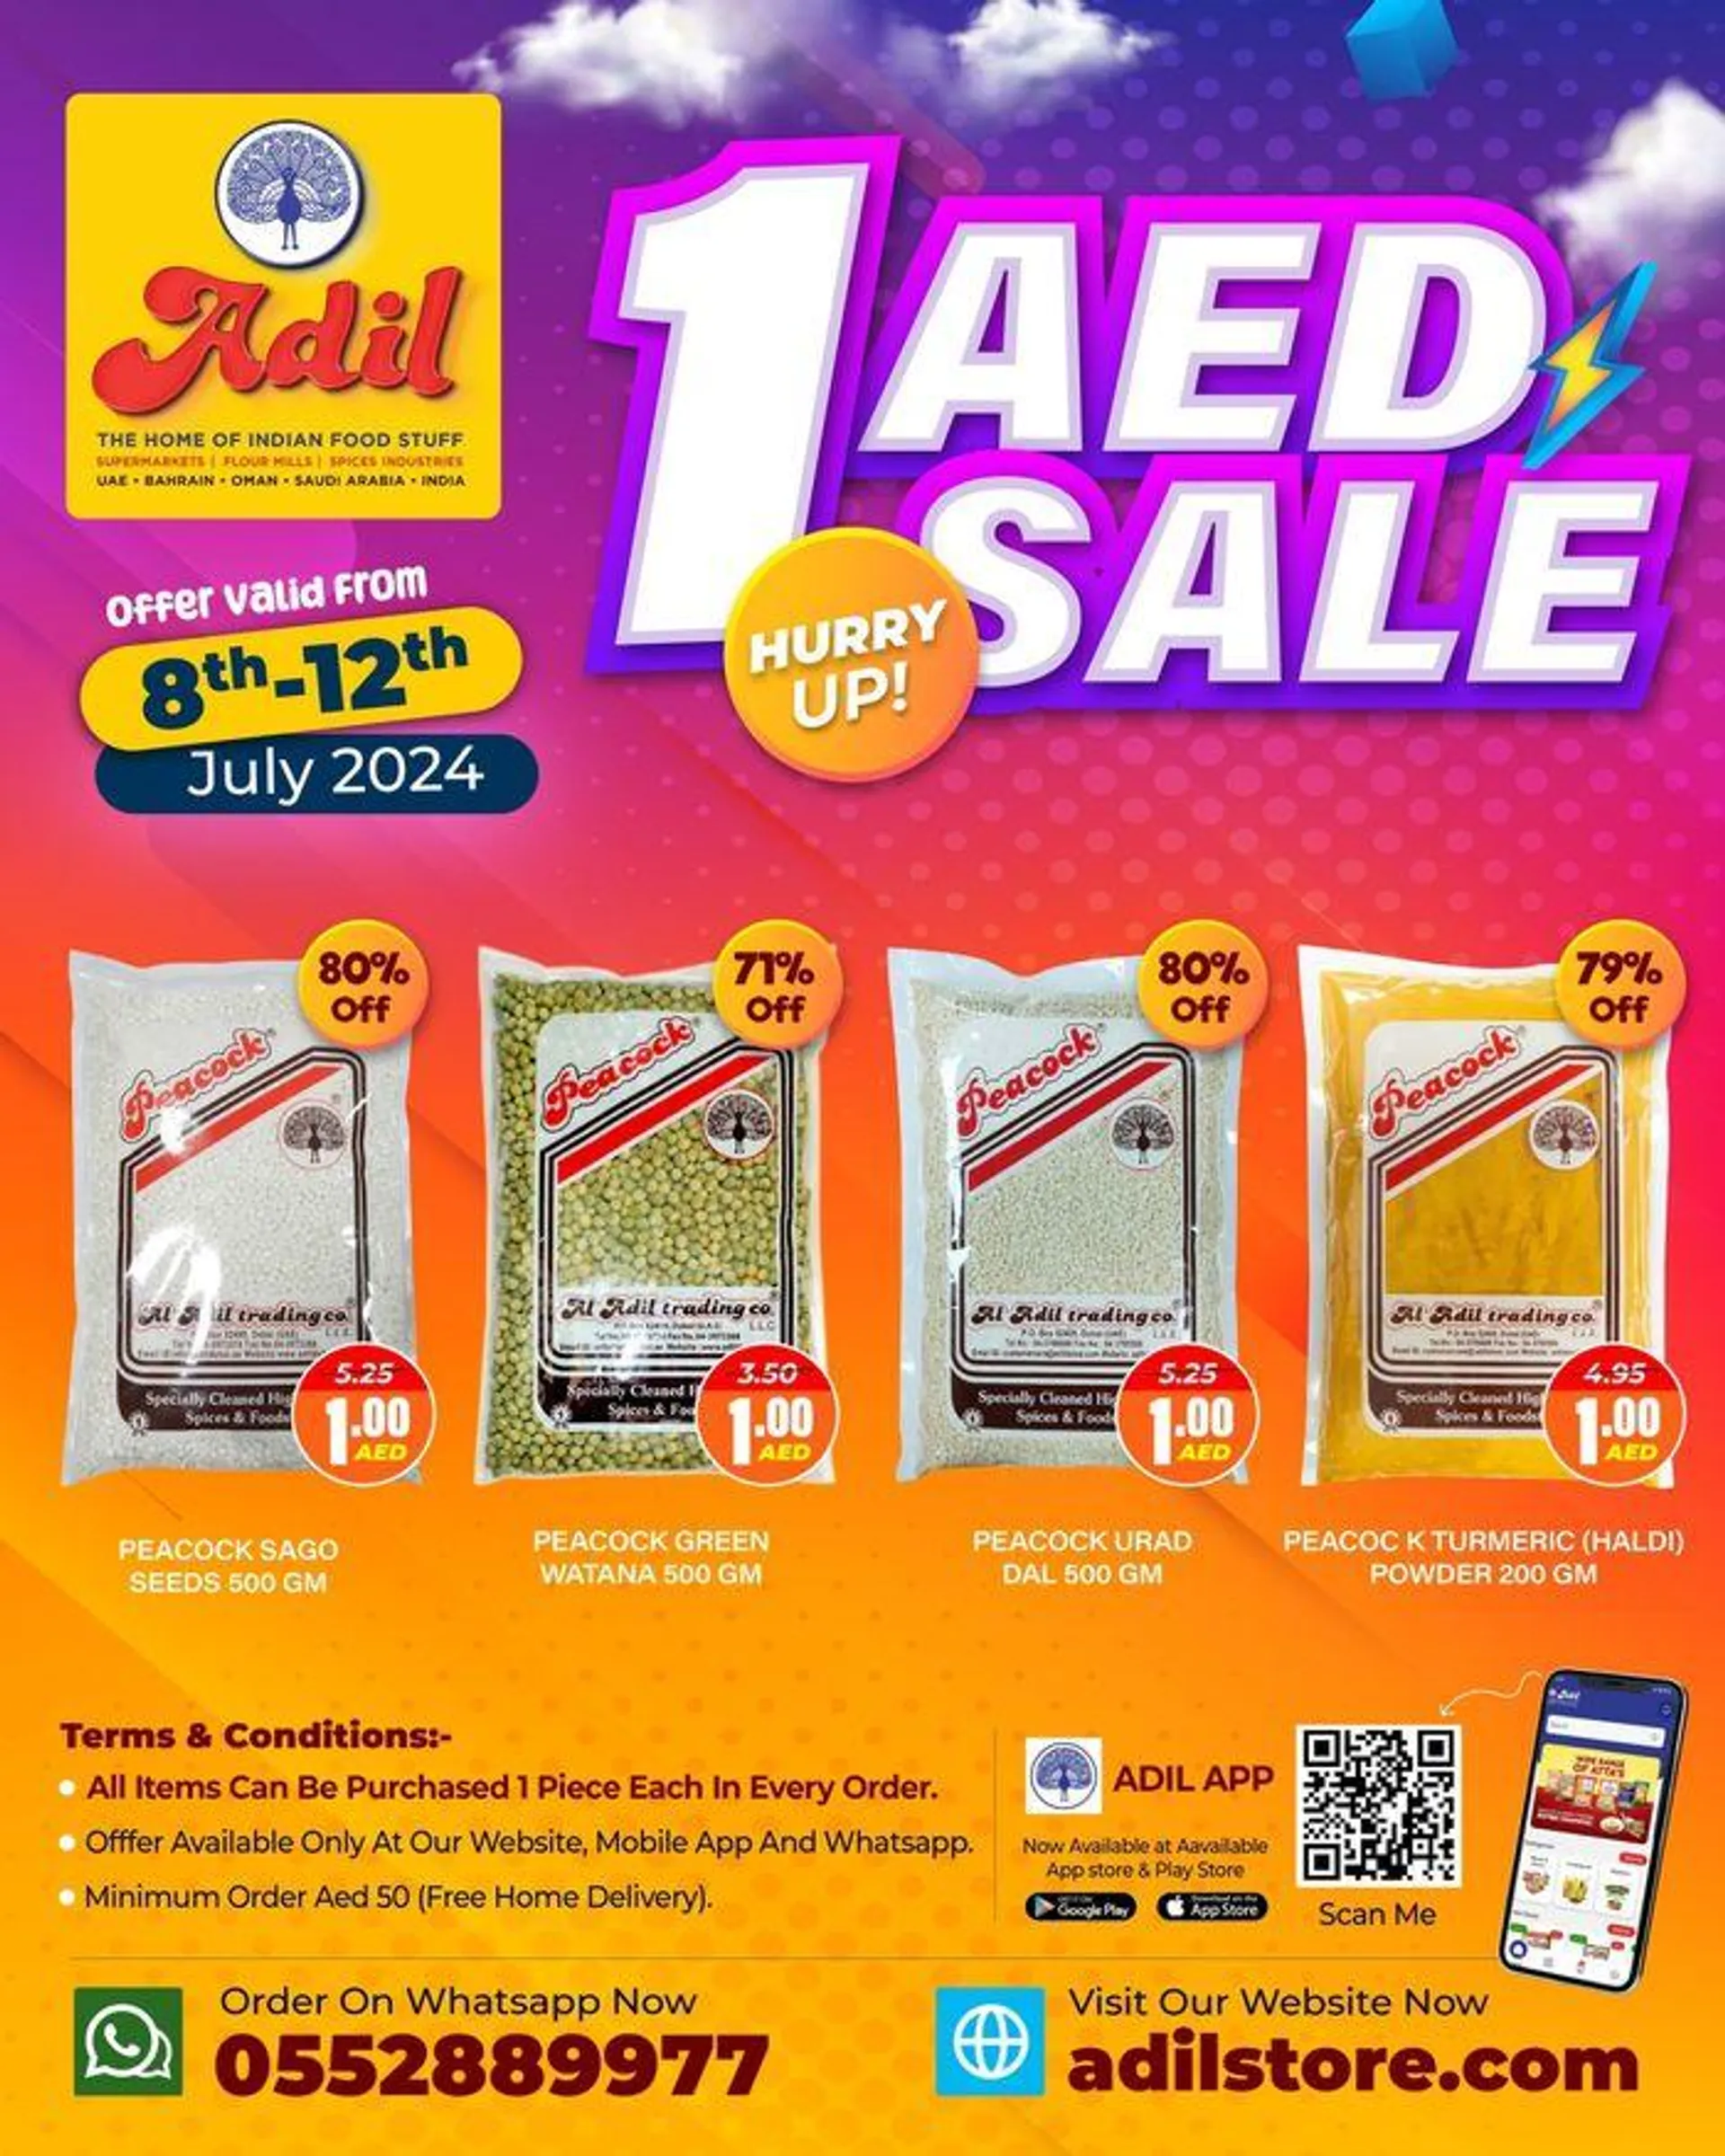 1 AED Sale - 1